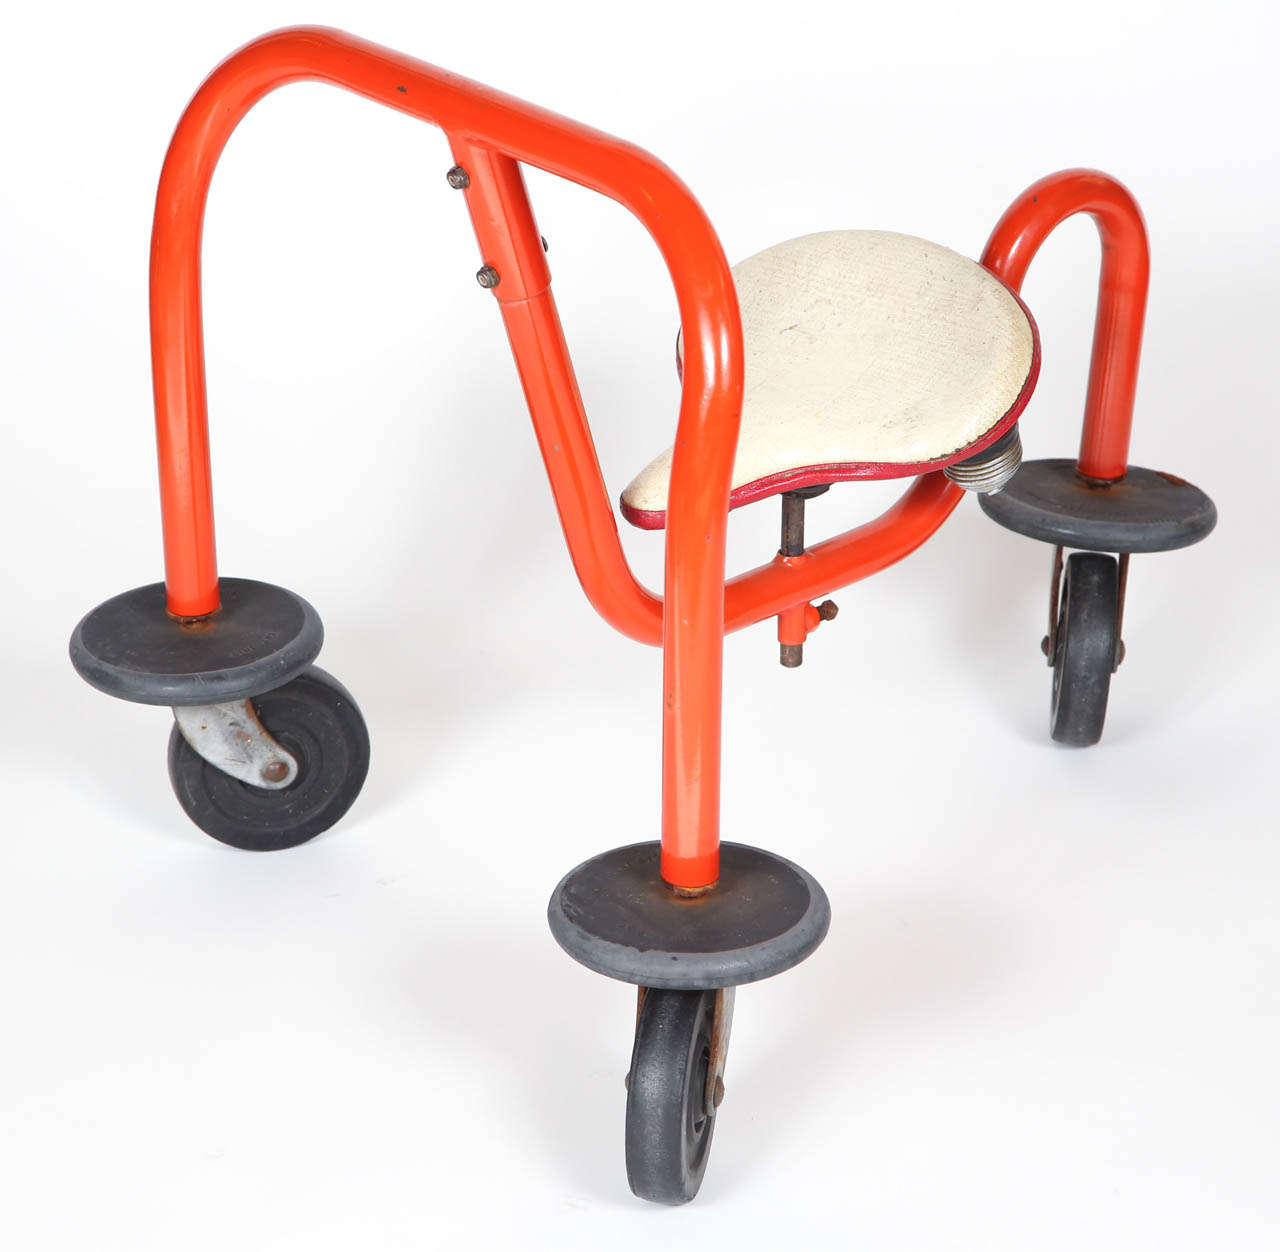 Mid-20th Century Walkee-Bike Child's Toy by William B. Fageol for Caldwell Industries